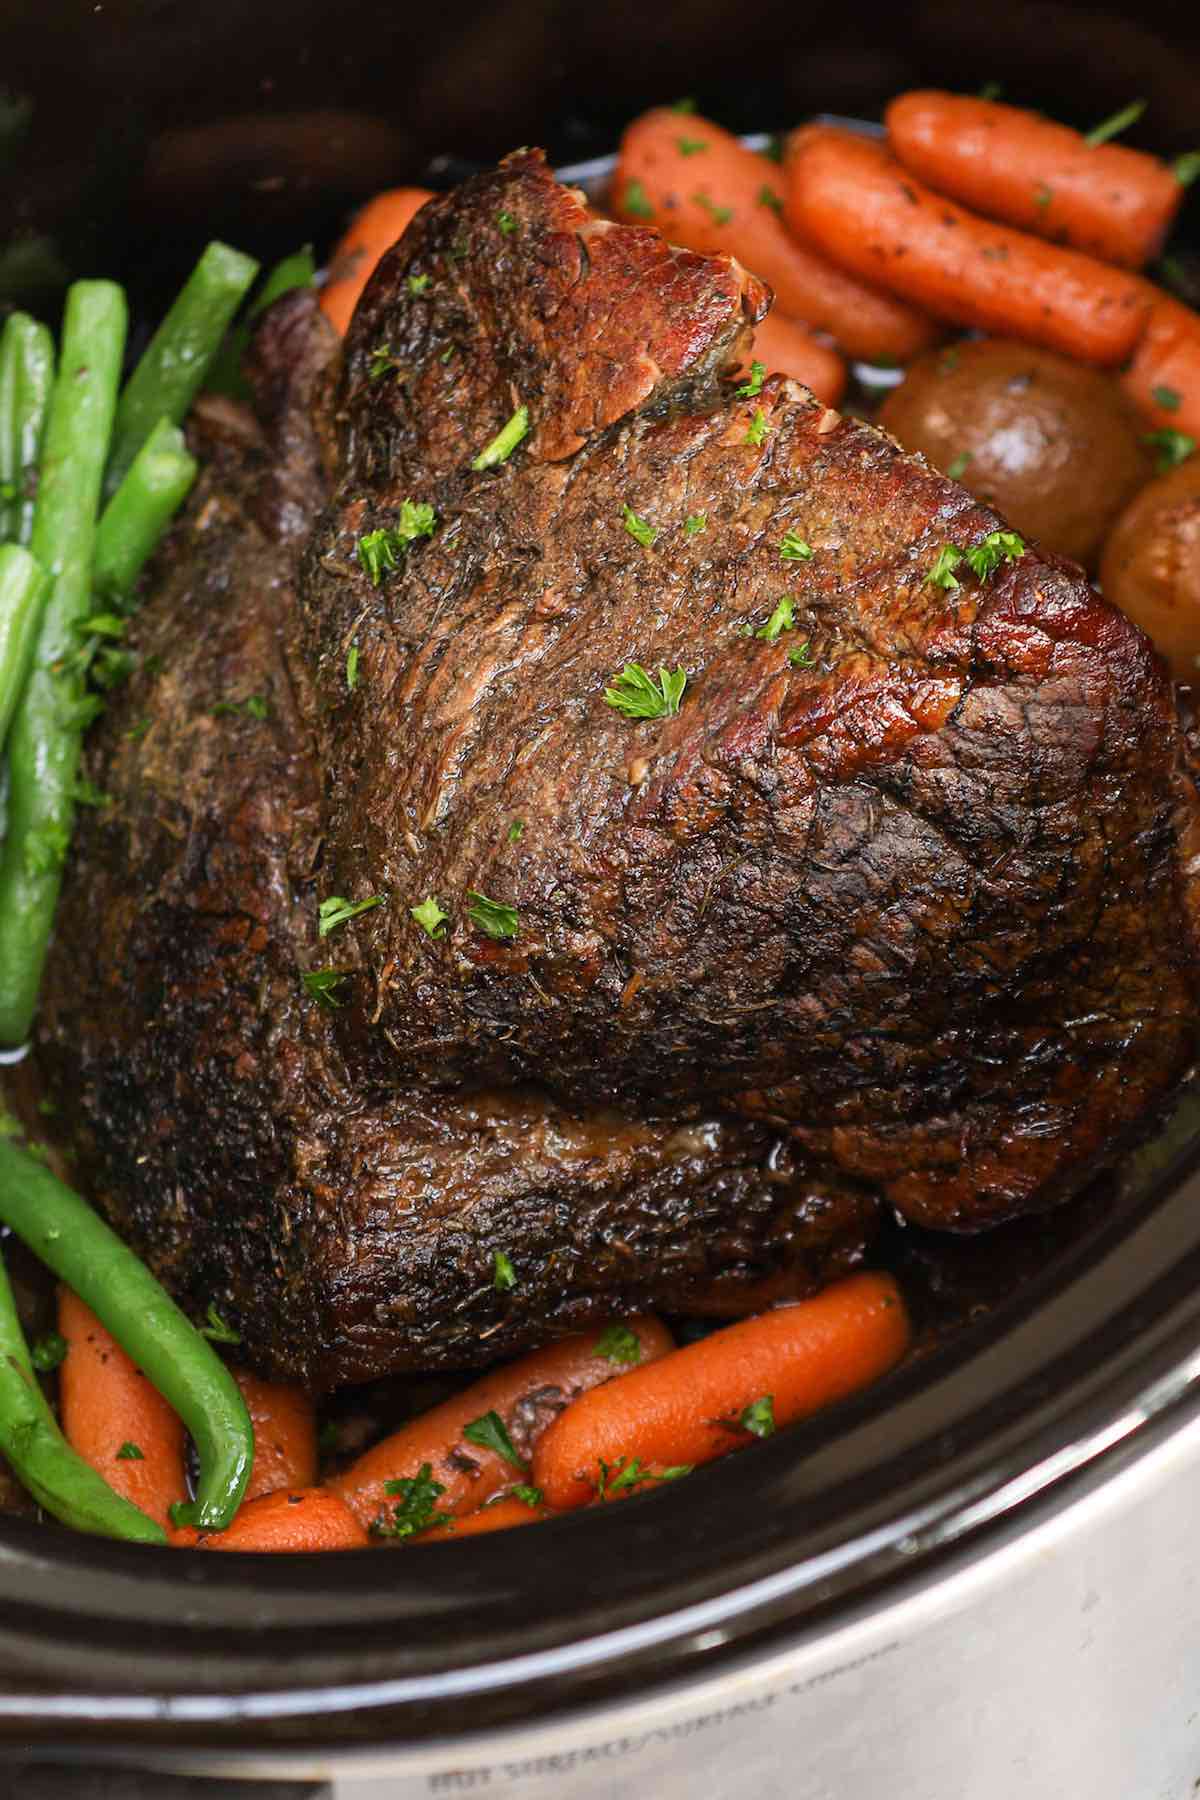 London broil with carrots, potatoes and green beans in the crock pot